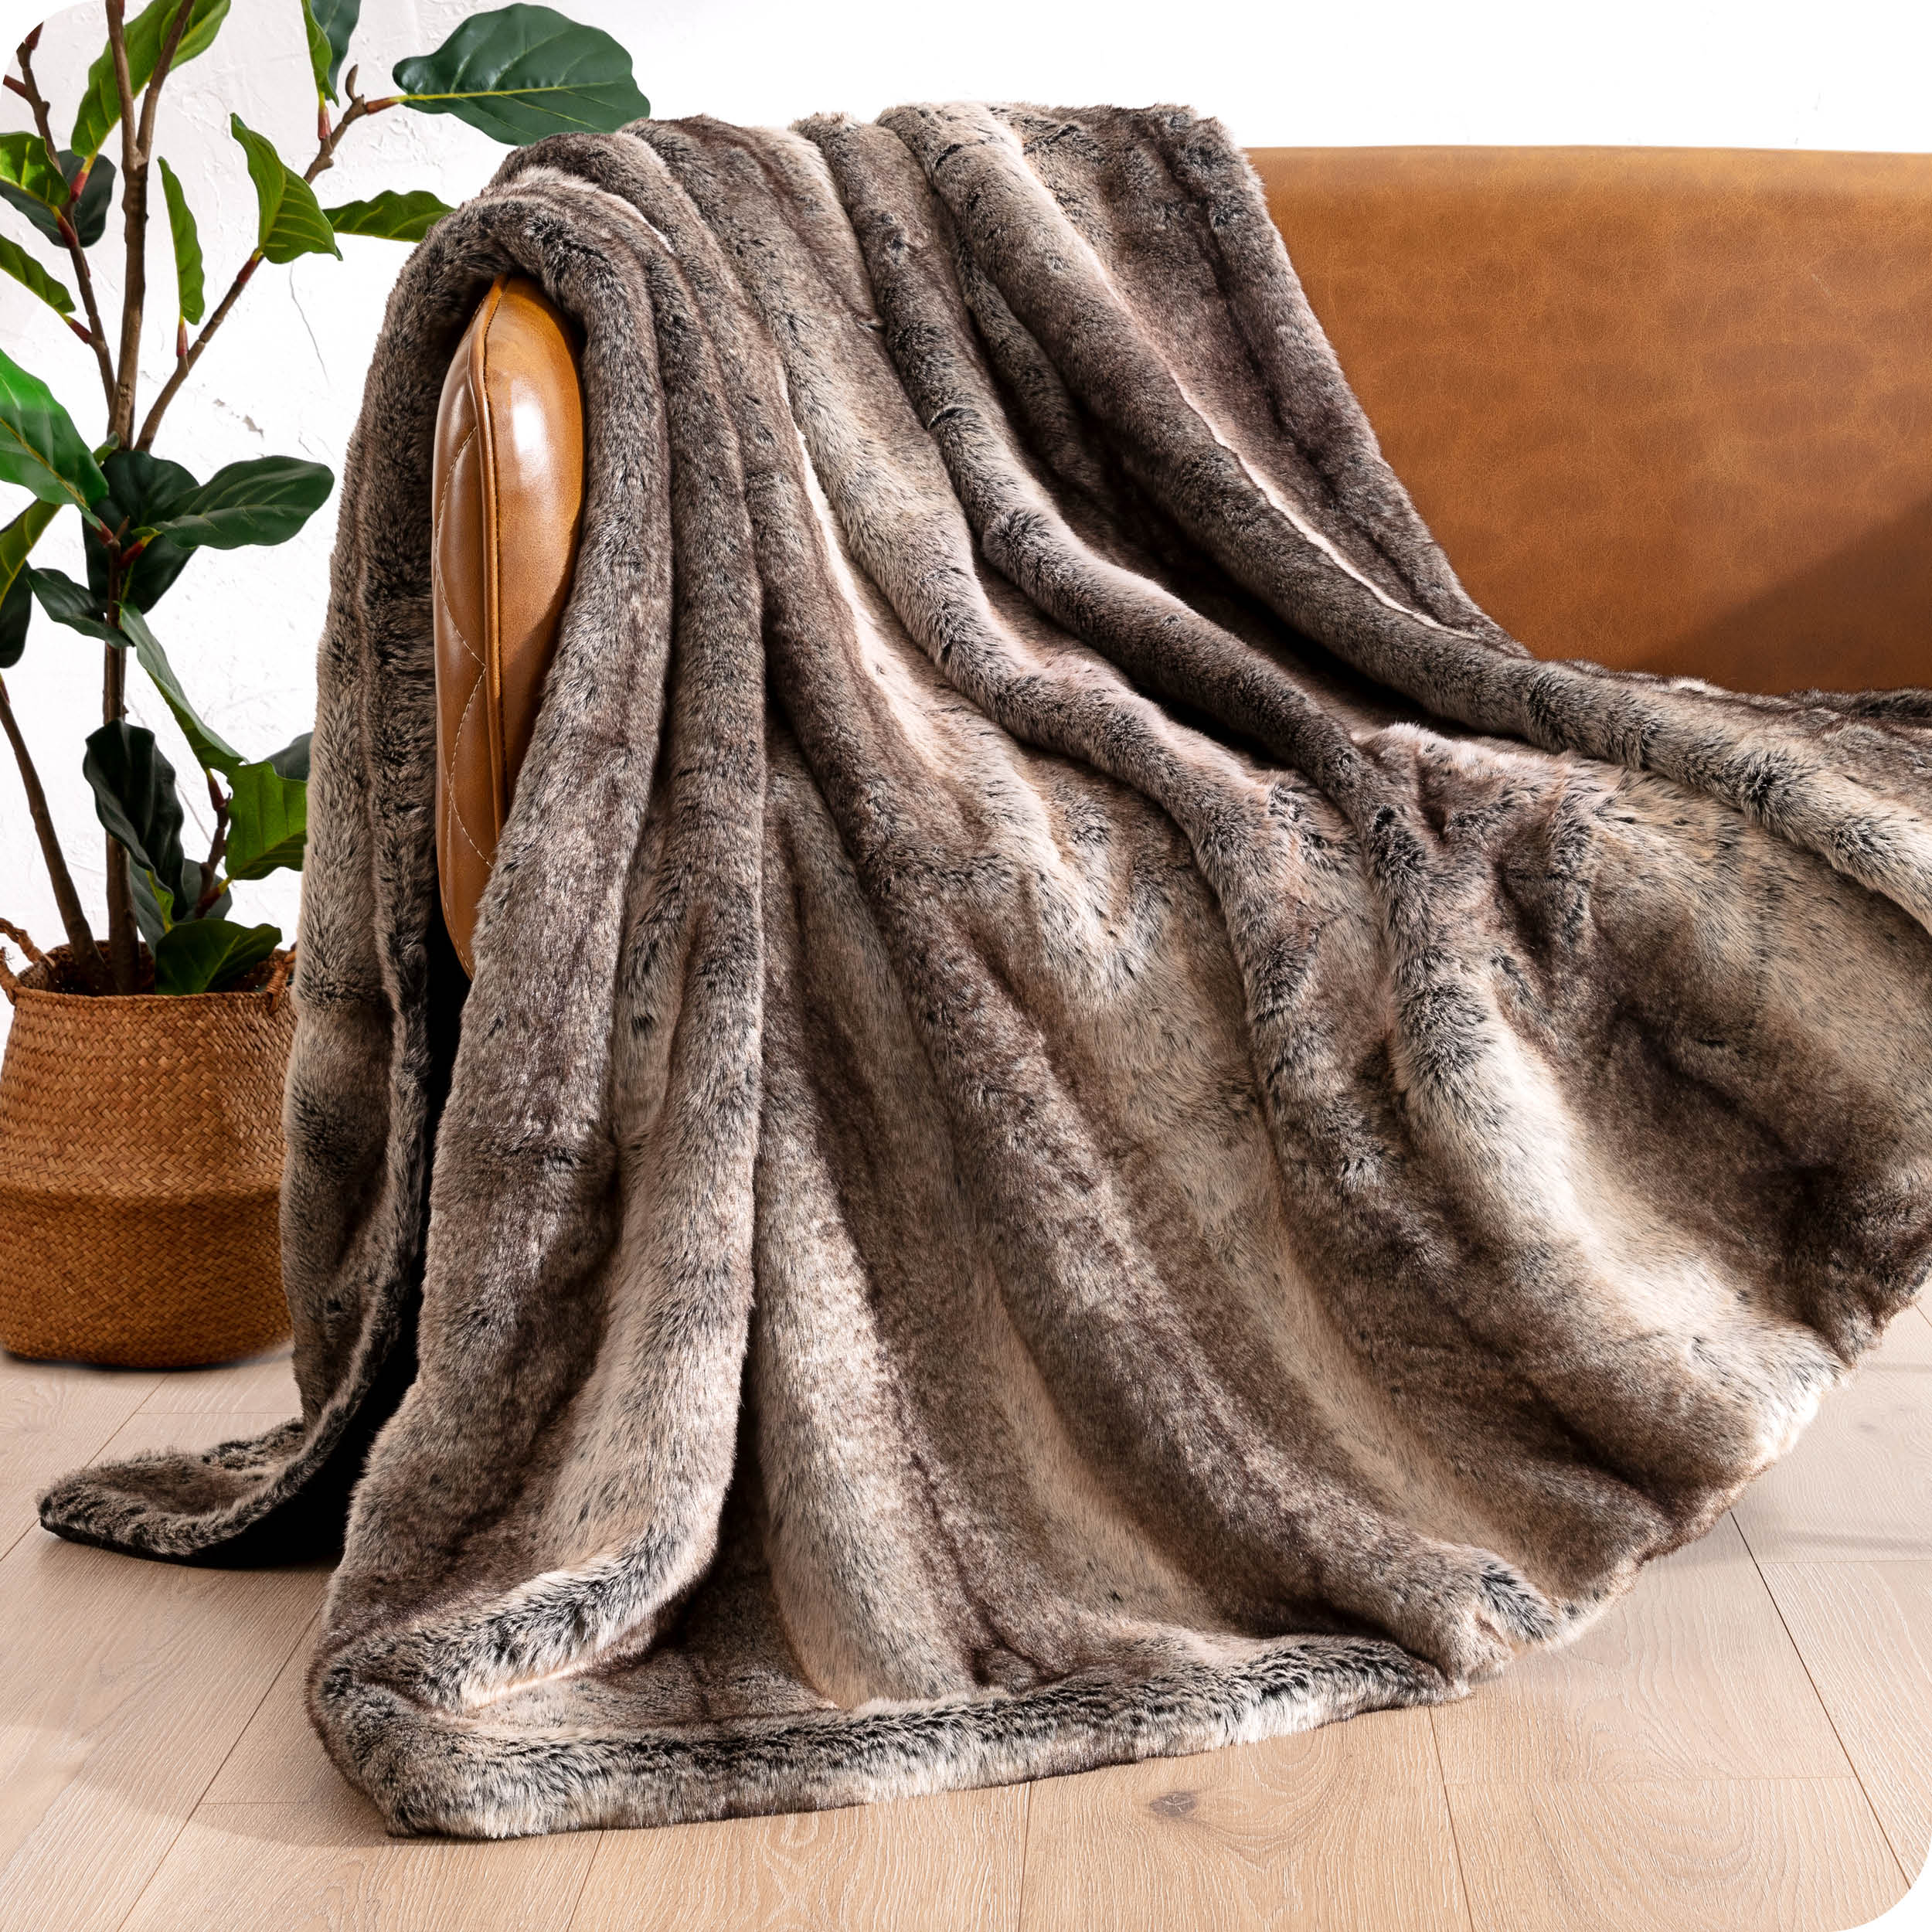 Faux fur blanket draped over a brown couch